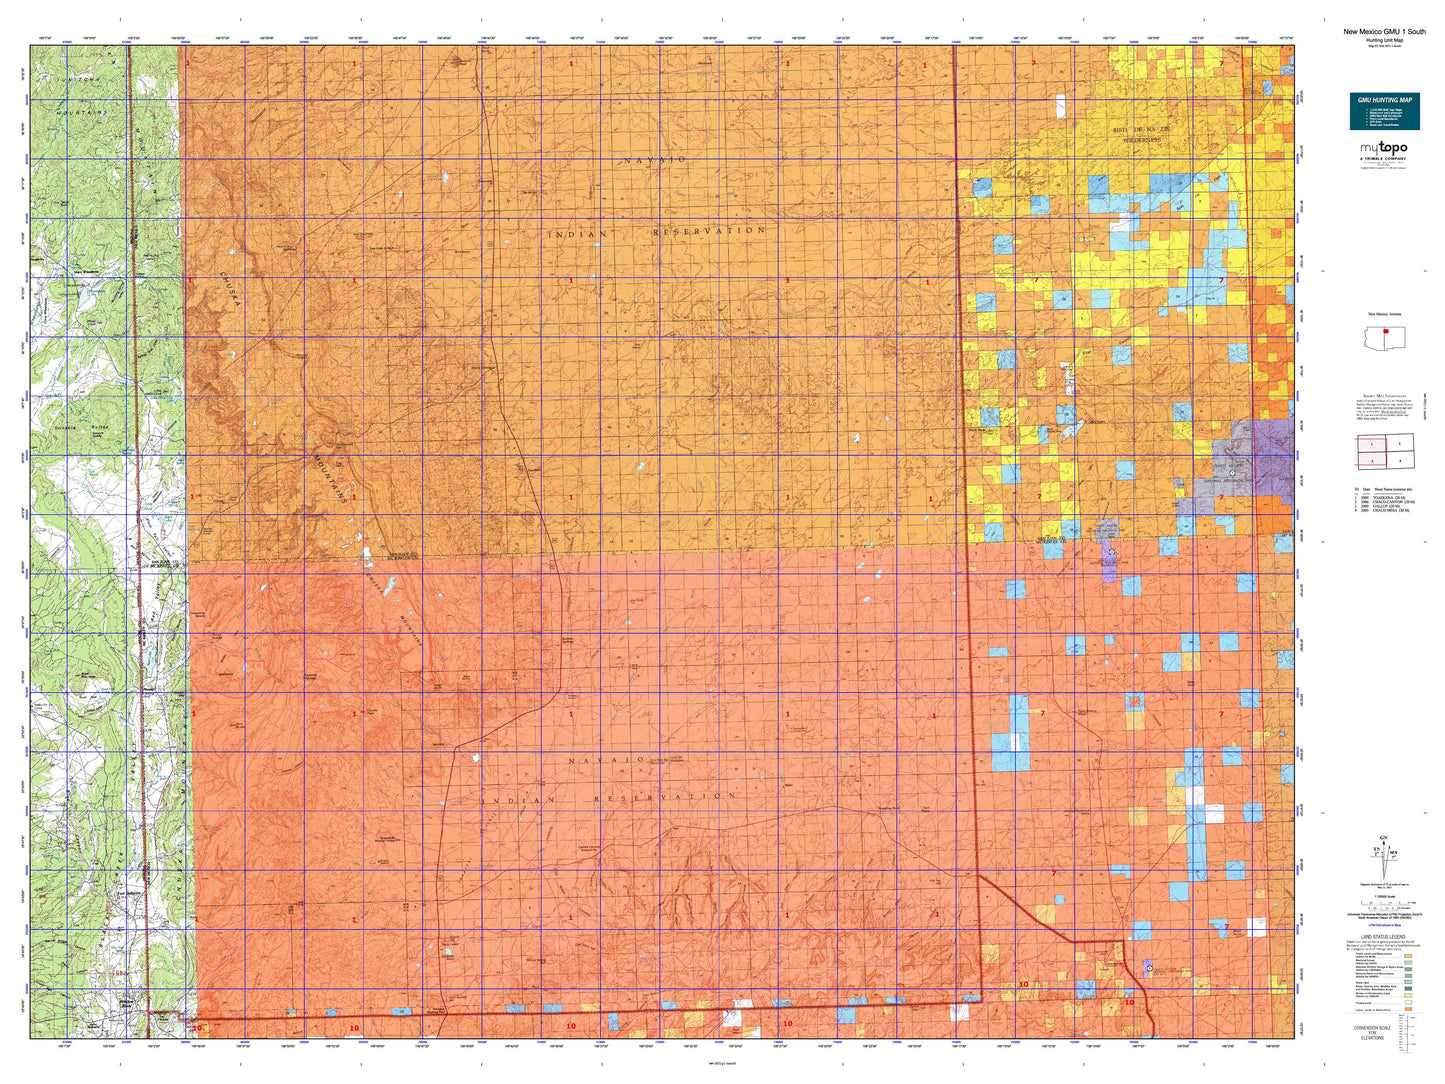 New Mexico GMU 1 South Map Image